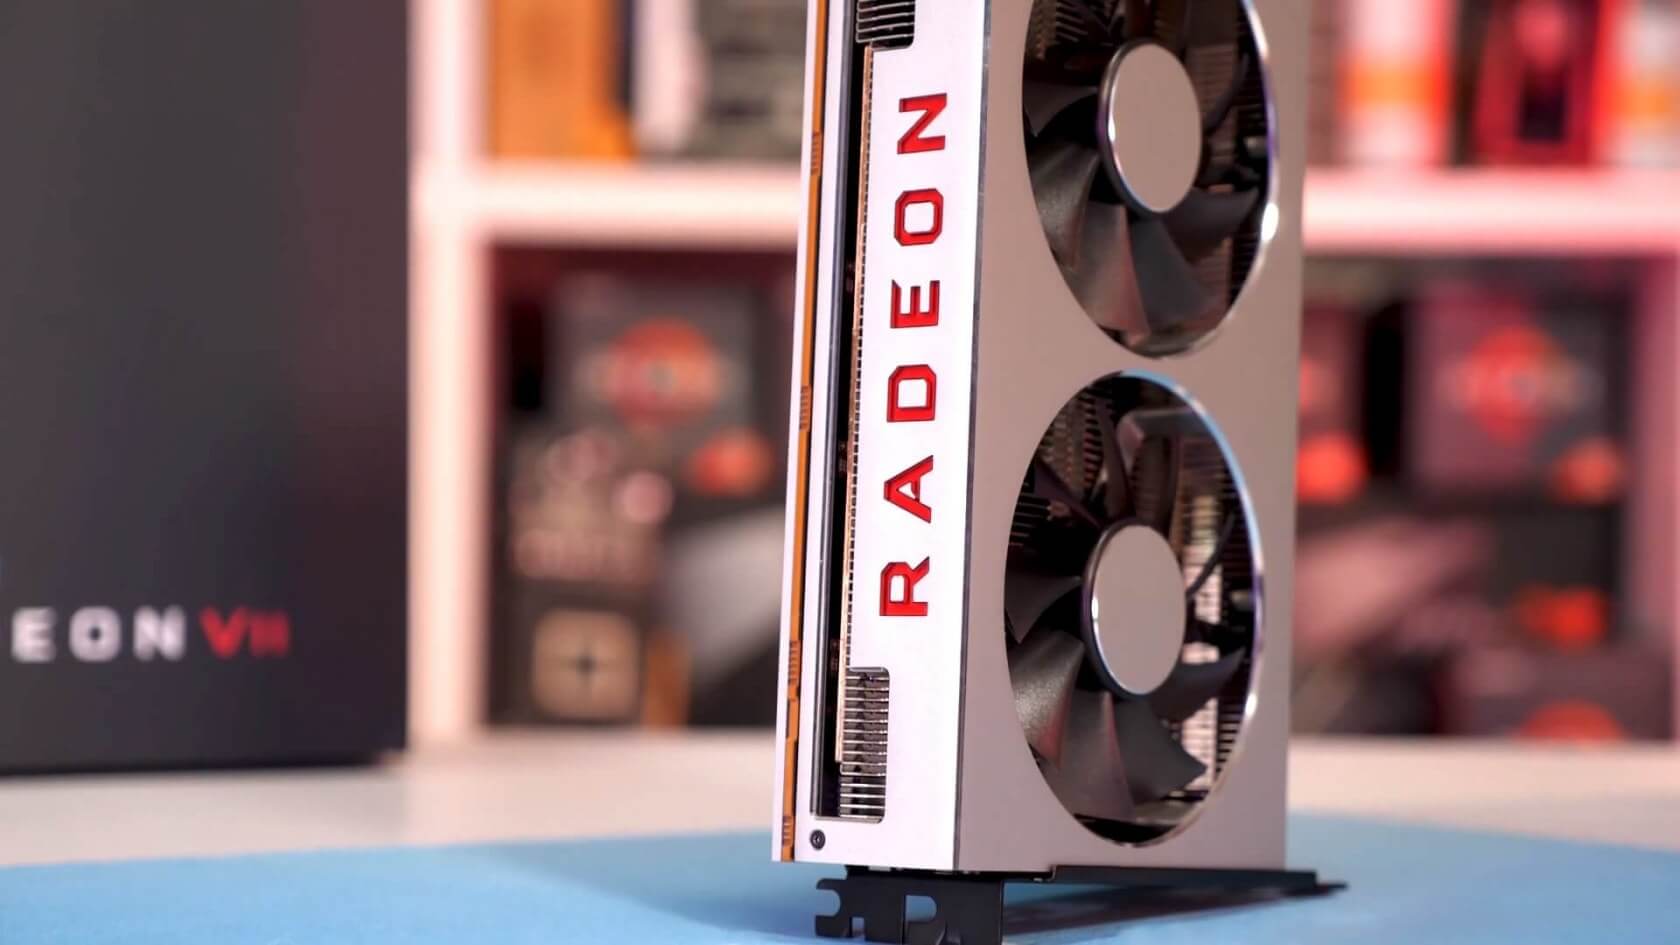 AMD's Radeon VII has reached end of life, probably